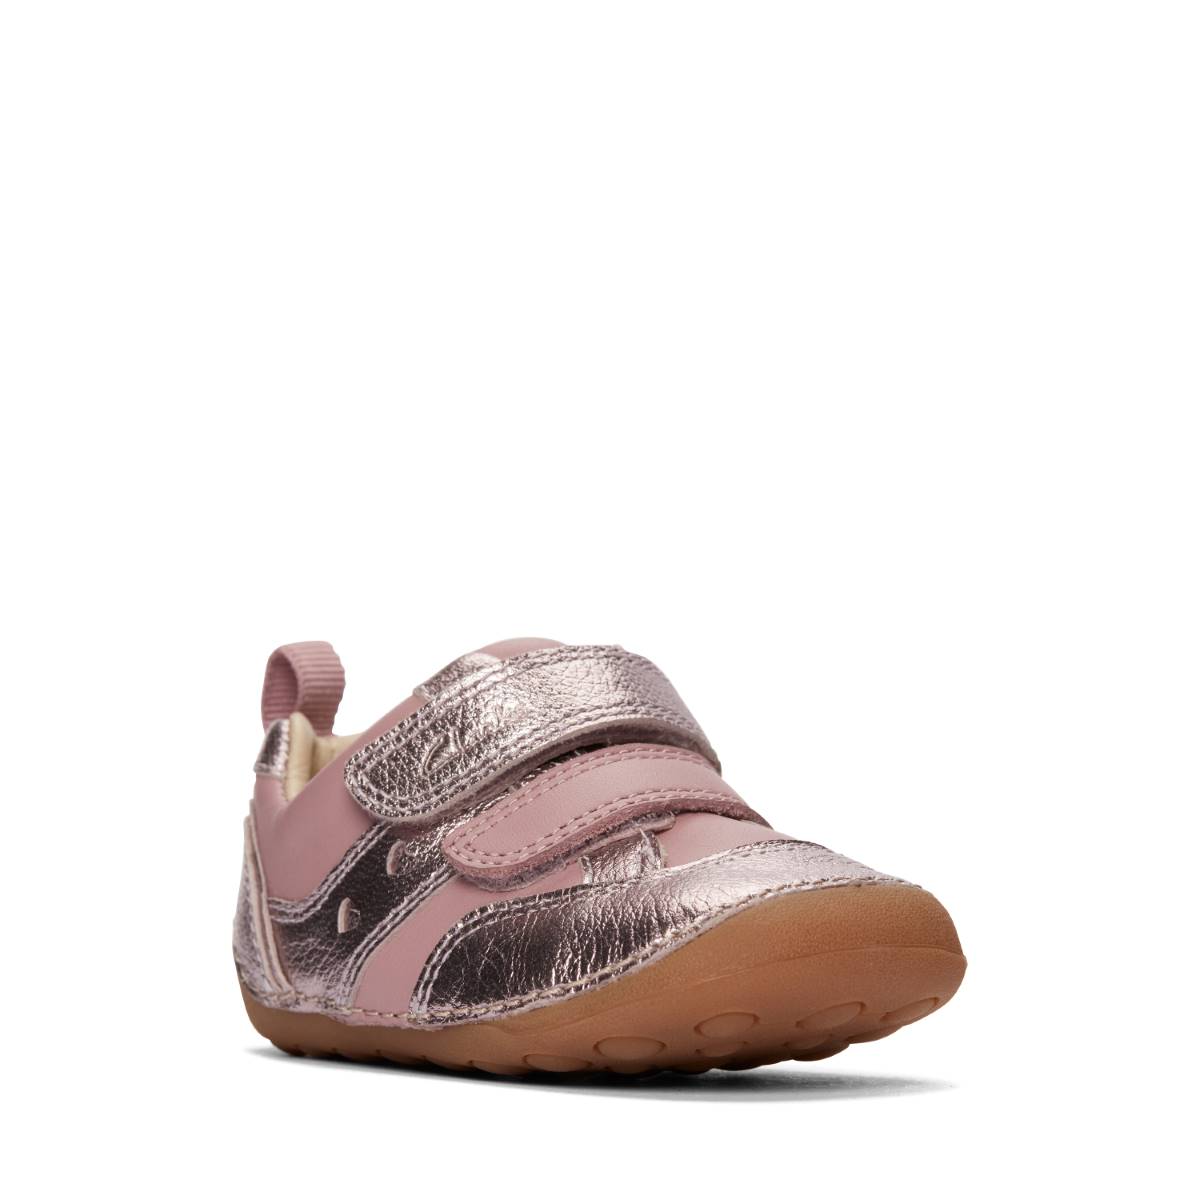 Clarks Tiny Sky T Blush Pink Kids girls first and baby shoes 7528-16F in a Plain Leather in Size 5.5